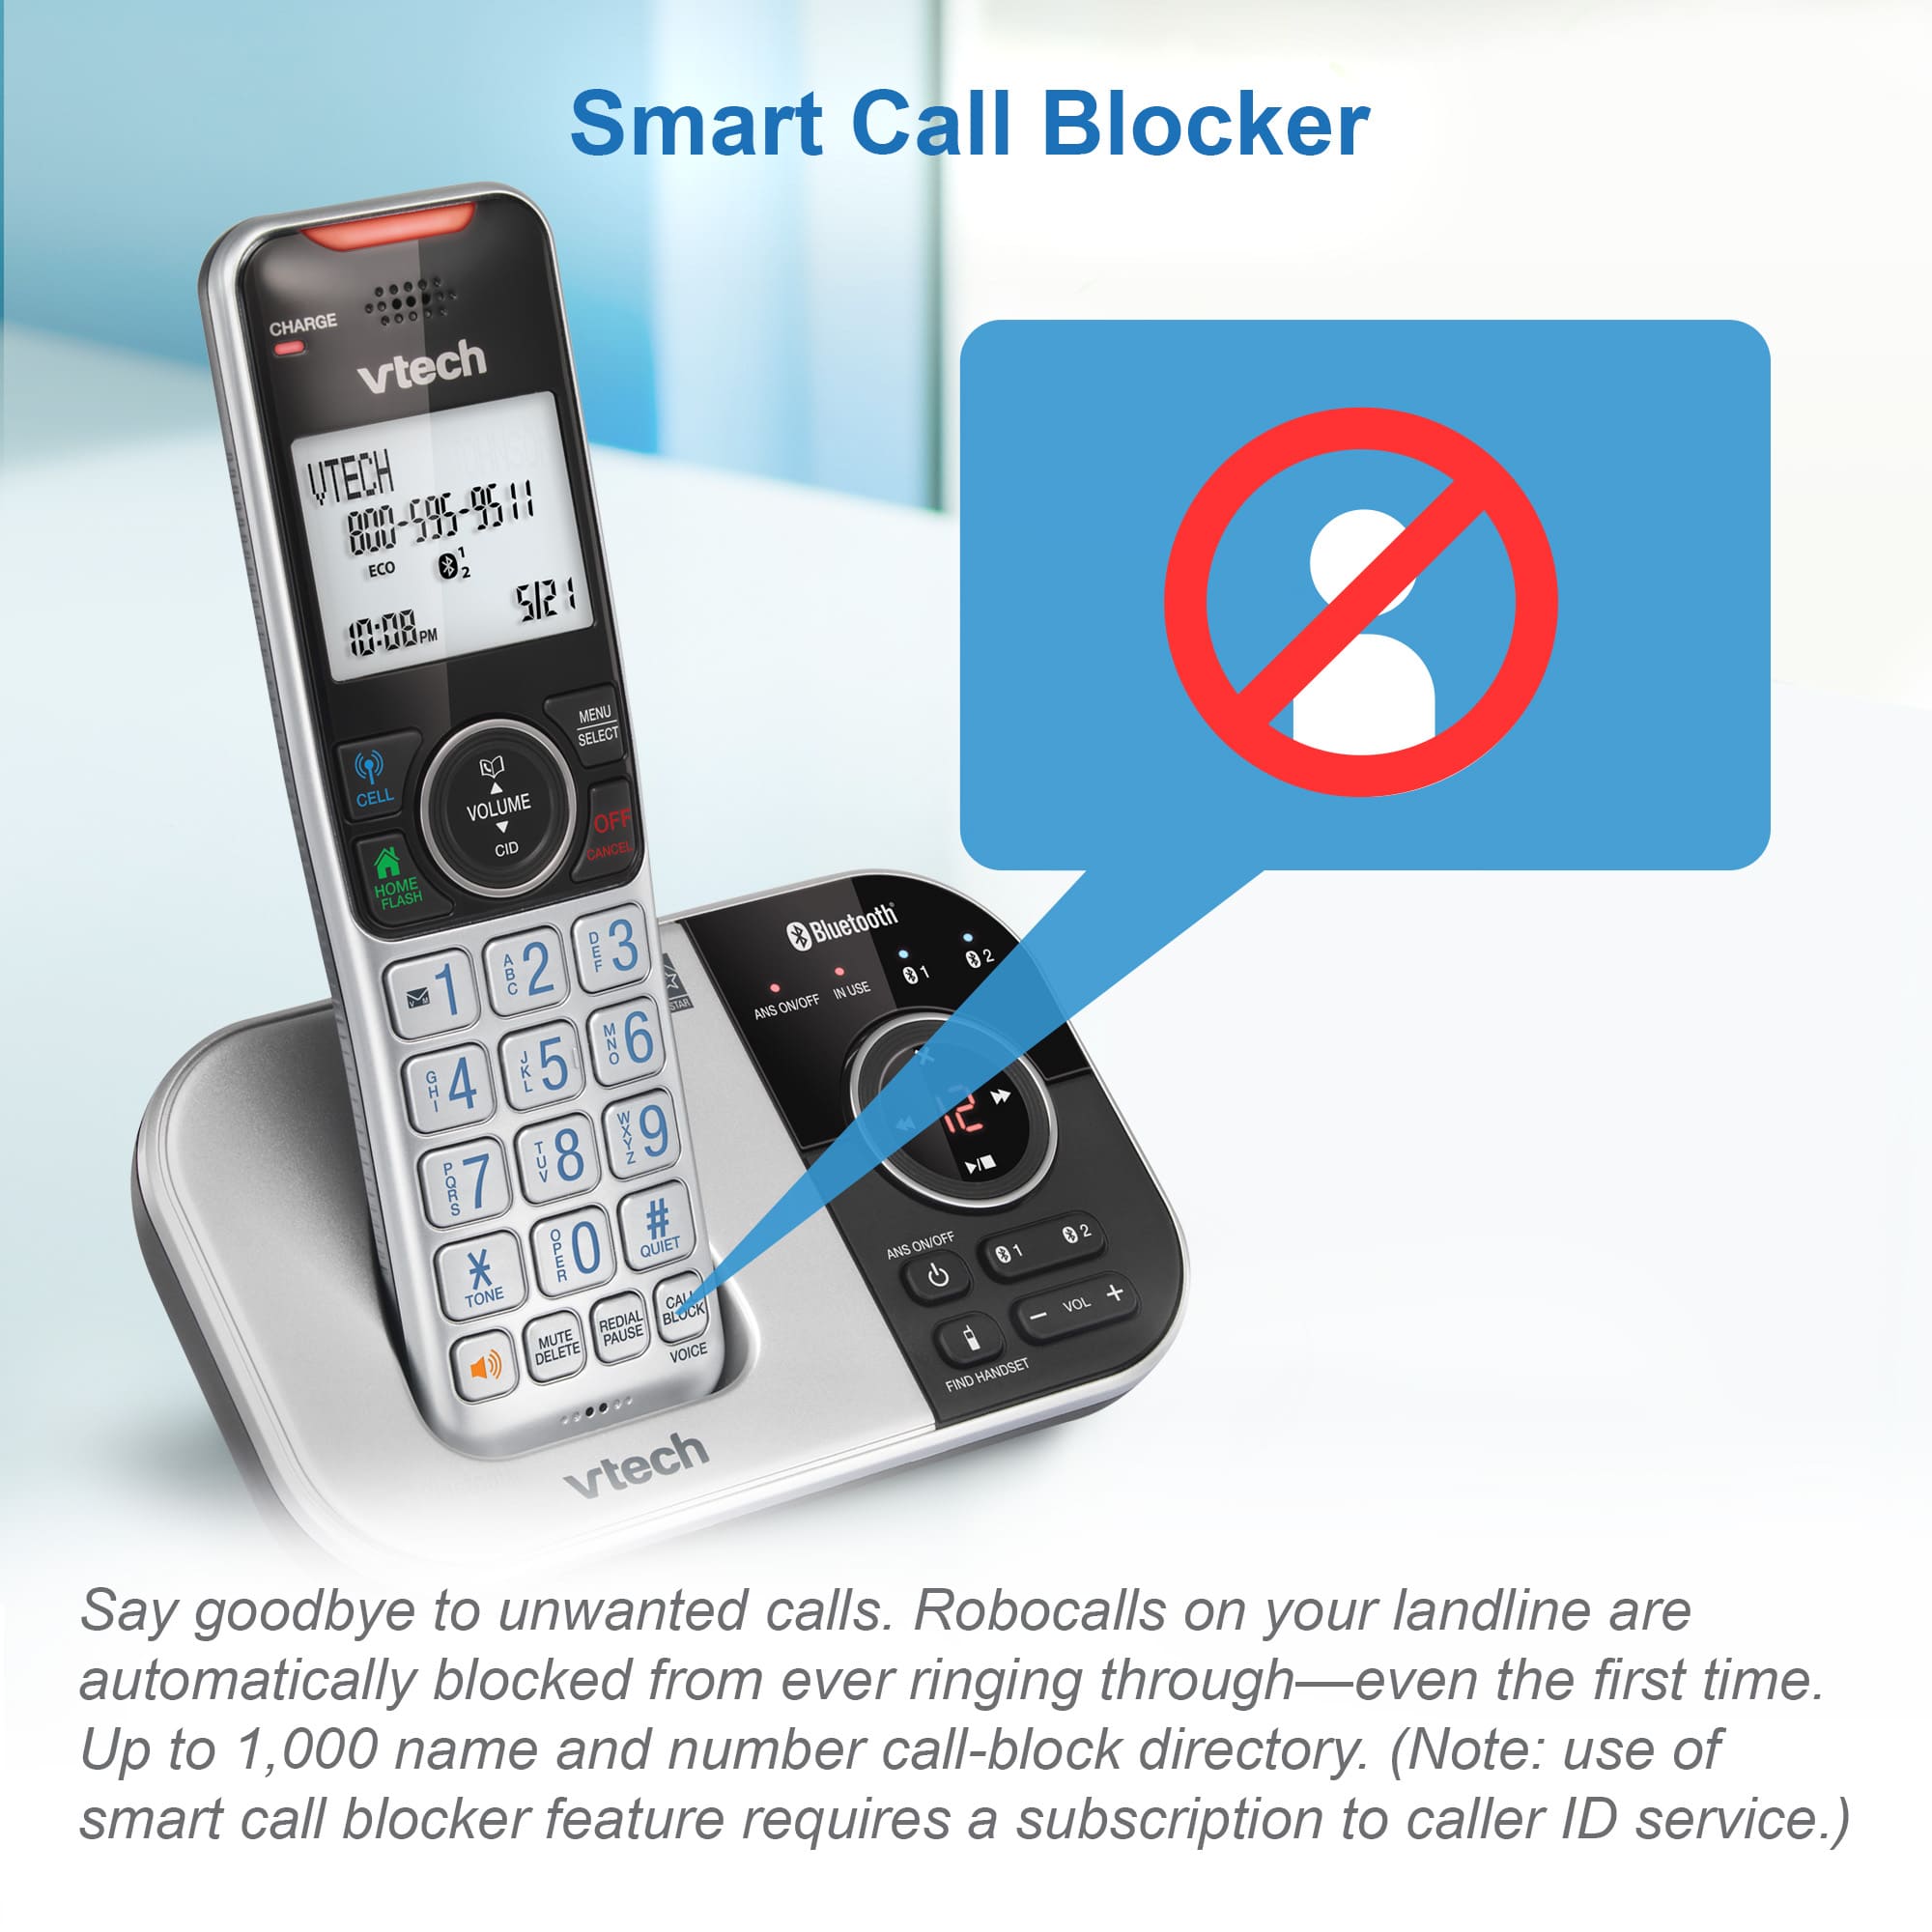 2-Handset Expandable Cordless Phone with Bluetooth Connect to Cell, Smart Call Blocker and Answering System (Silver & Black) - view 5